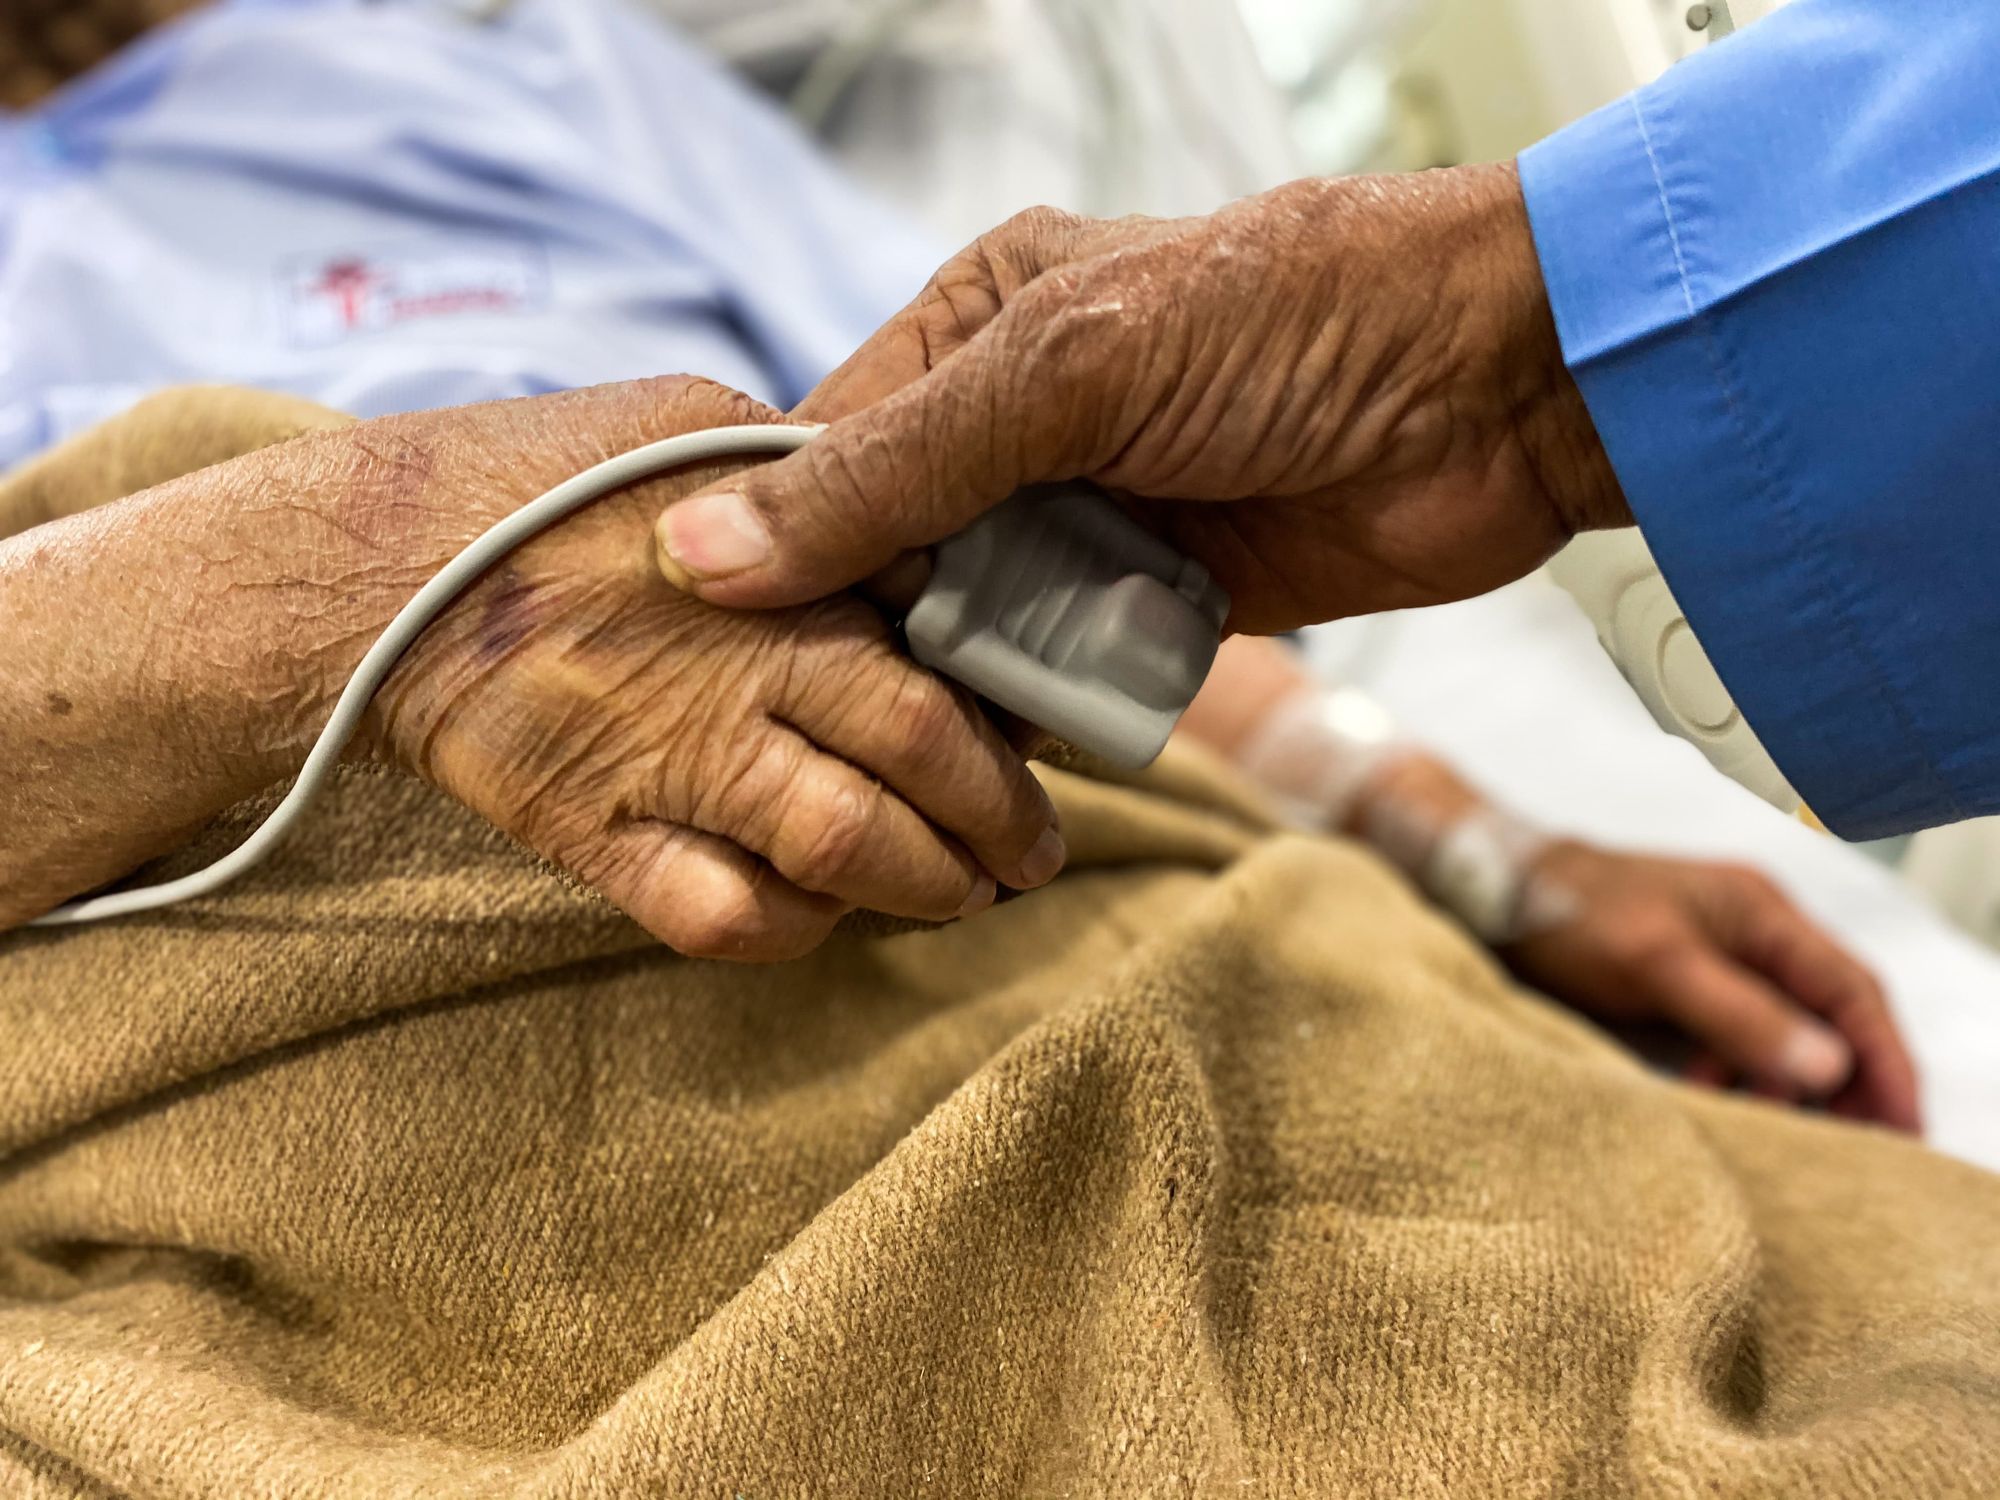 A person holding a sick patient's hand